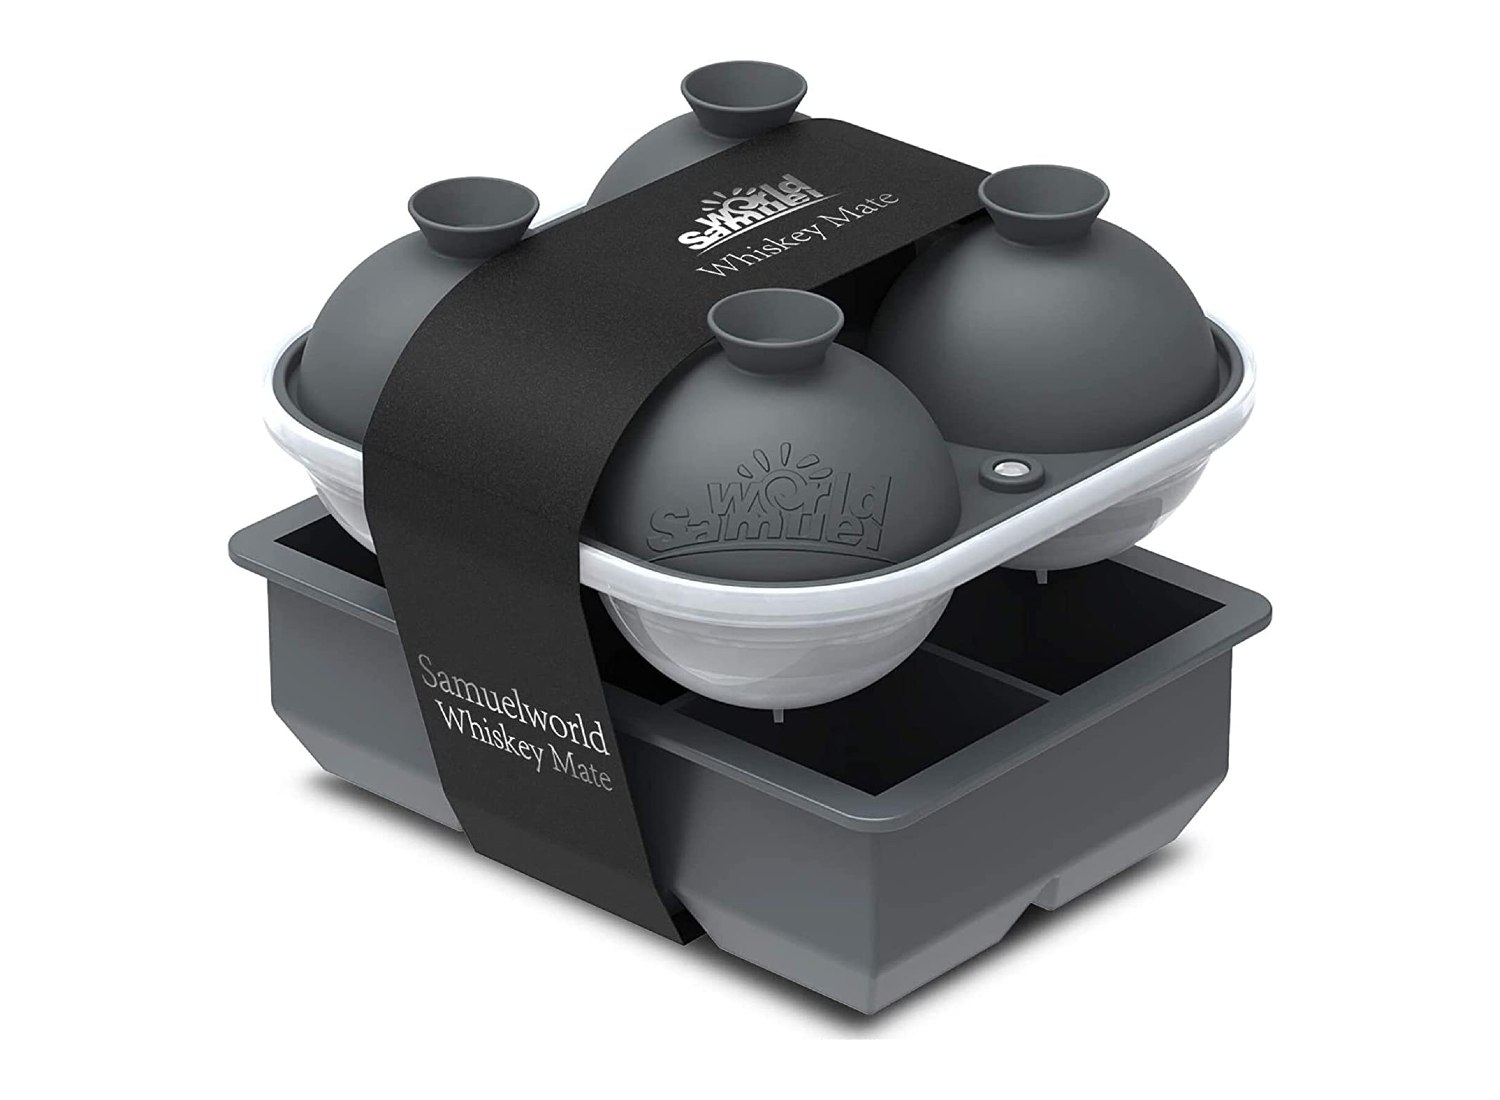 The meltdown Ice device is best Ice ball maker on the market